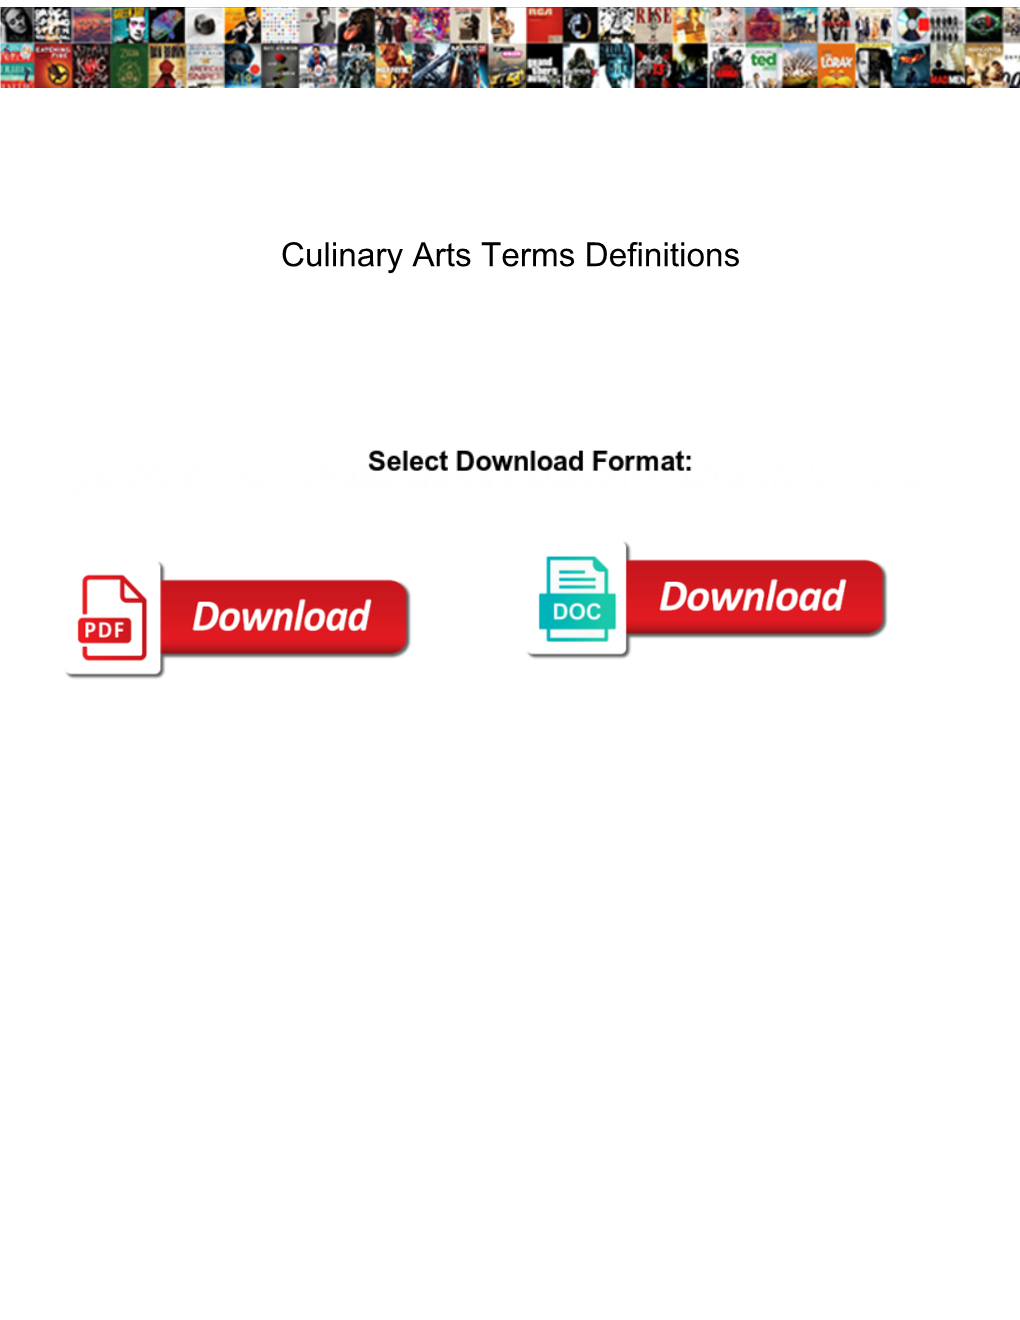 Culinary Arts Terms Definitions